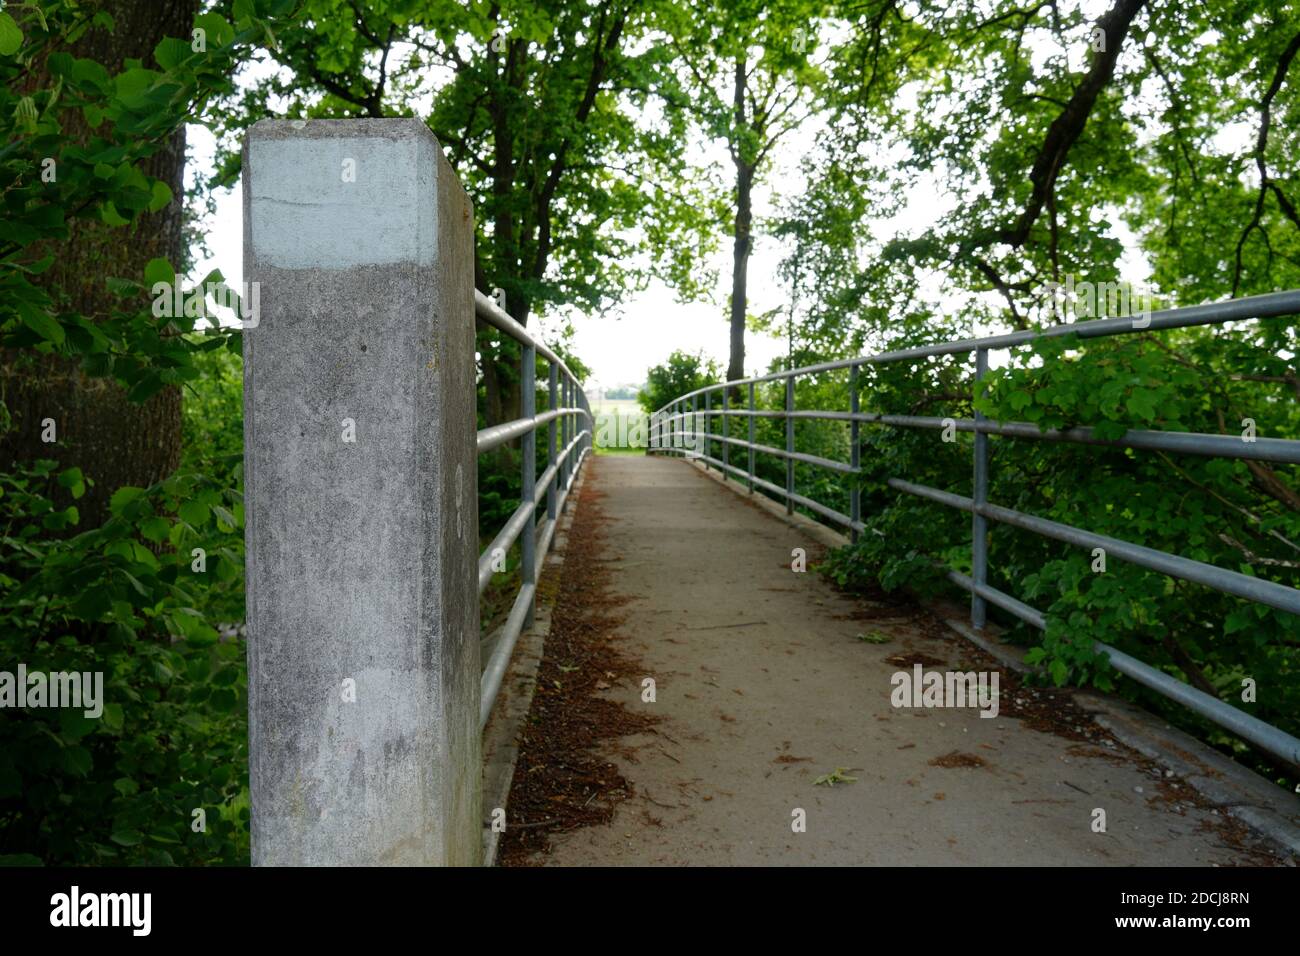 A narrow bridge with metal railings and concrete pylon surrounded by lush green vegetation diminishing in the perspective of a sun flooded land. Stock Photo